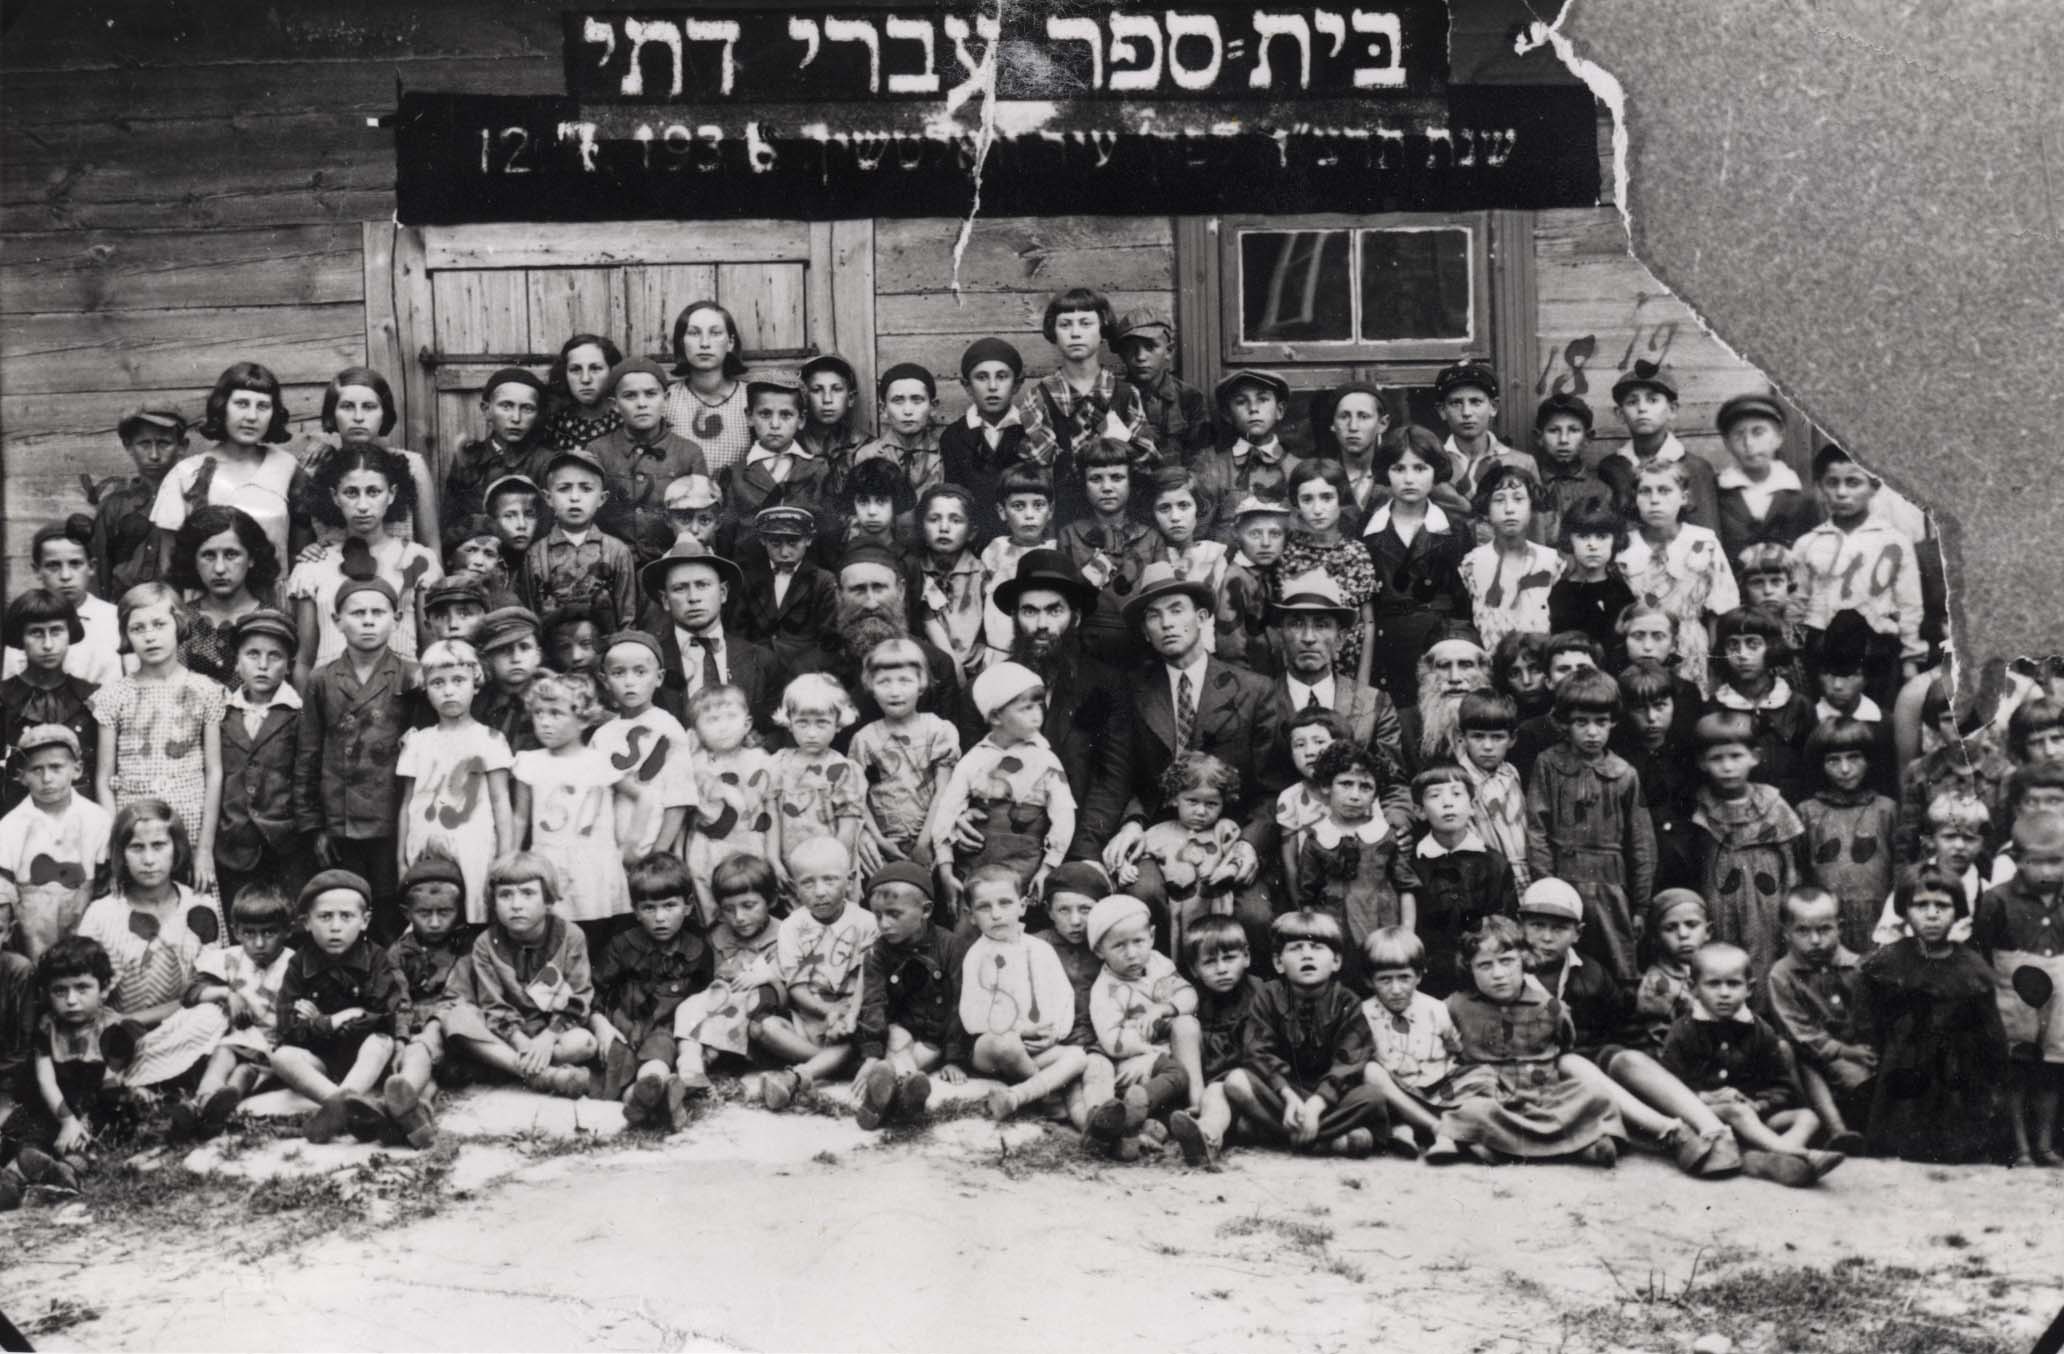 Students and teachers of the Hebrew religious school in Wołczyn